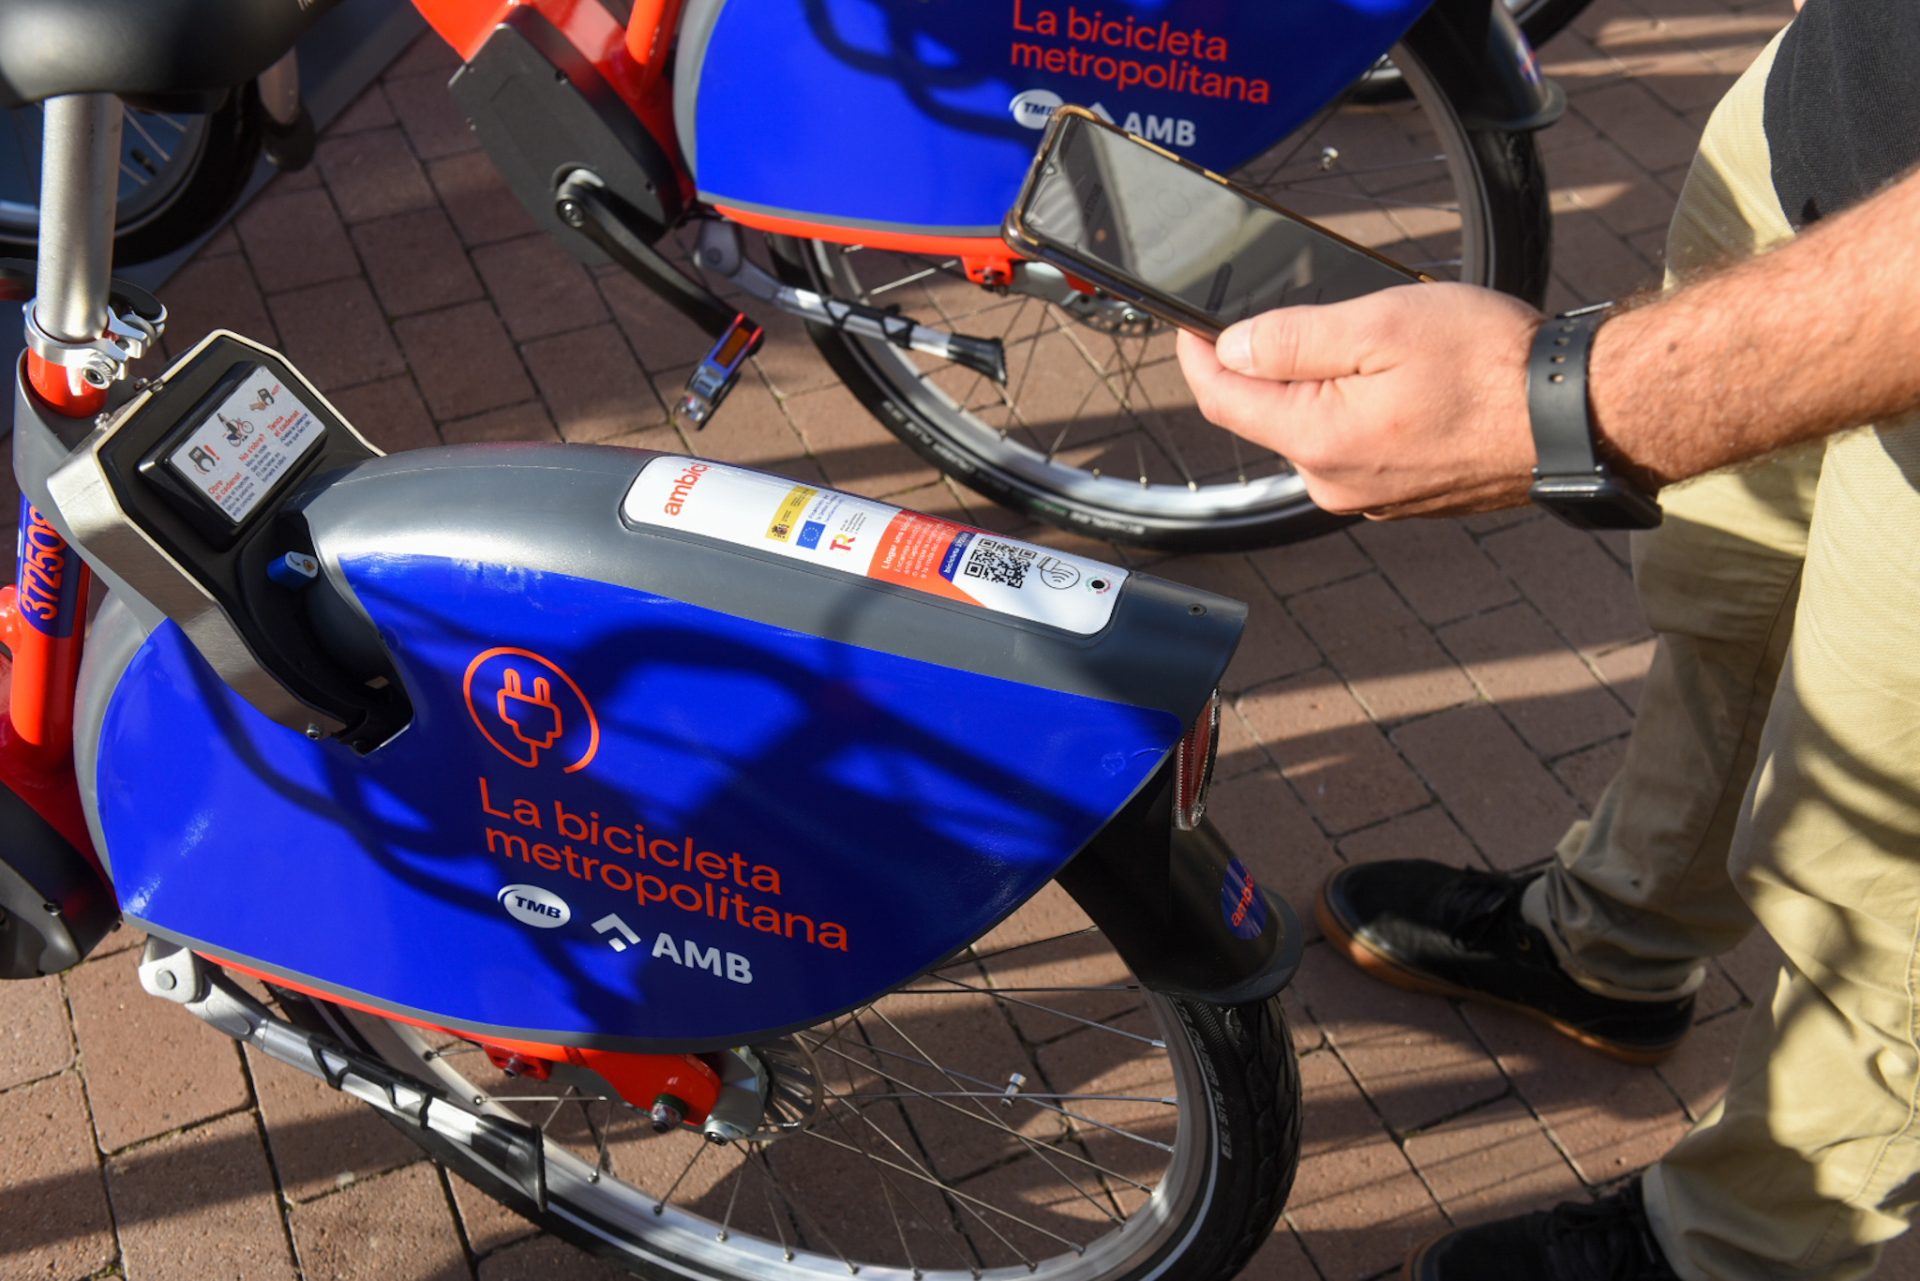 Rent an ambici bike with the nextbike app by scanning the QR code on the bike.